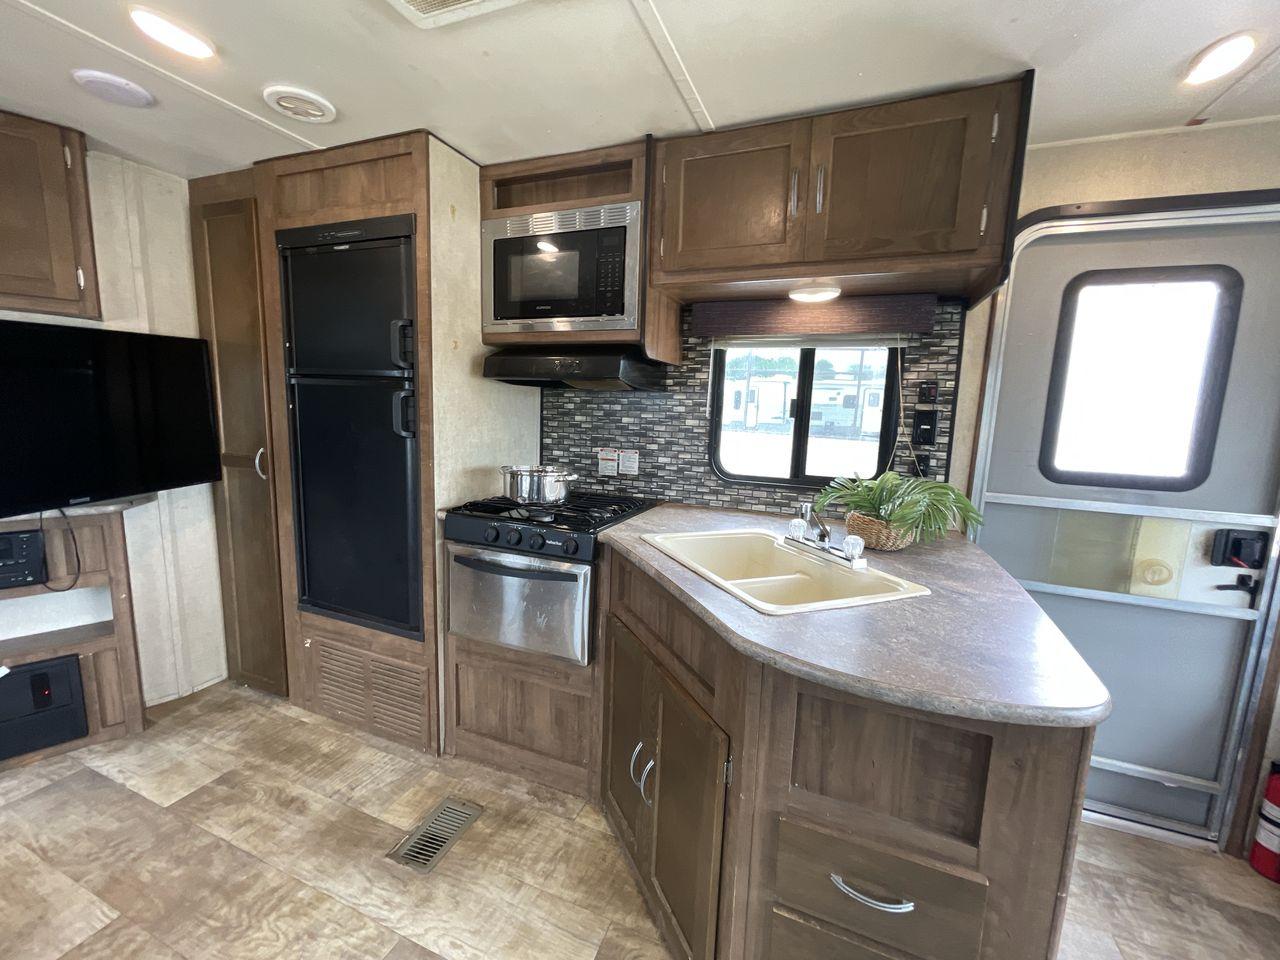 2018 GULFSTREAM TRAILMASTER 262RLS (1NL1GTP2XJ1) , Length: 31.25 ft. | Dry Weight: 6,849 lbs. | Slides: 1 transmission, located at 4319 N Main St, Cleburne, TX, 76033, (817) 678-5133, 32.385960, -97.391212 - This 2018 Gulf Stream Trailmaster 262RLS travel trailer measures just over 31' in length. It is a dual axle, steel wheel setup with a dry weight of 6,849 lbs and a carrying capacity of 1,421 lbs. With a dry weight of 6,849 lbs., the Trailmaster 262RLS offers easy maneuverability without compromising - Photo #10